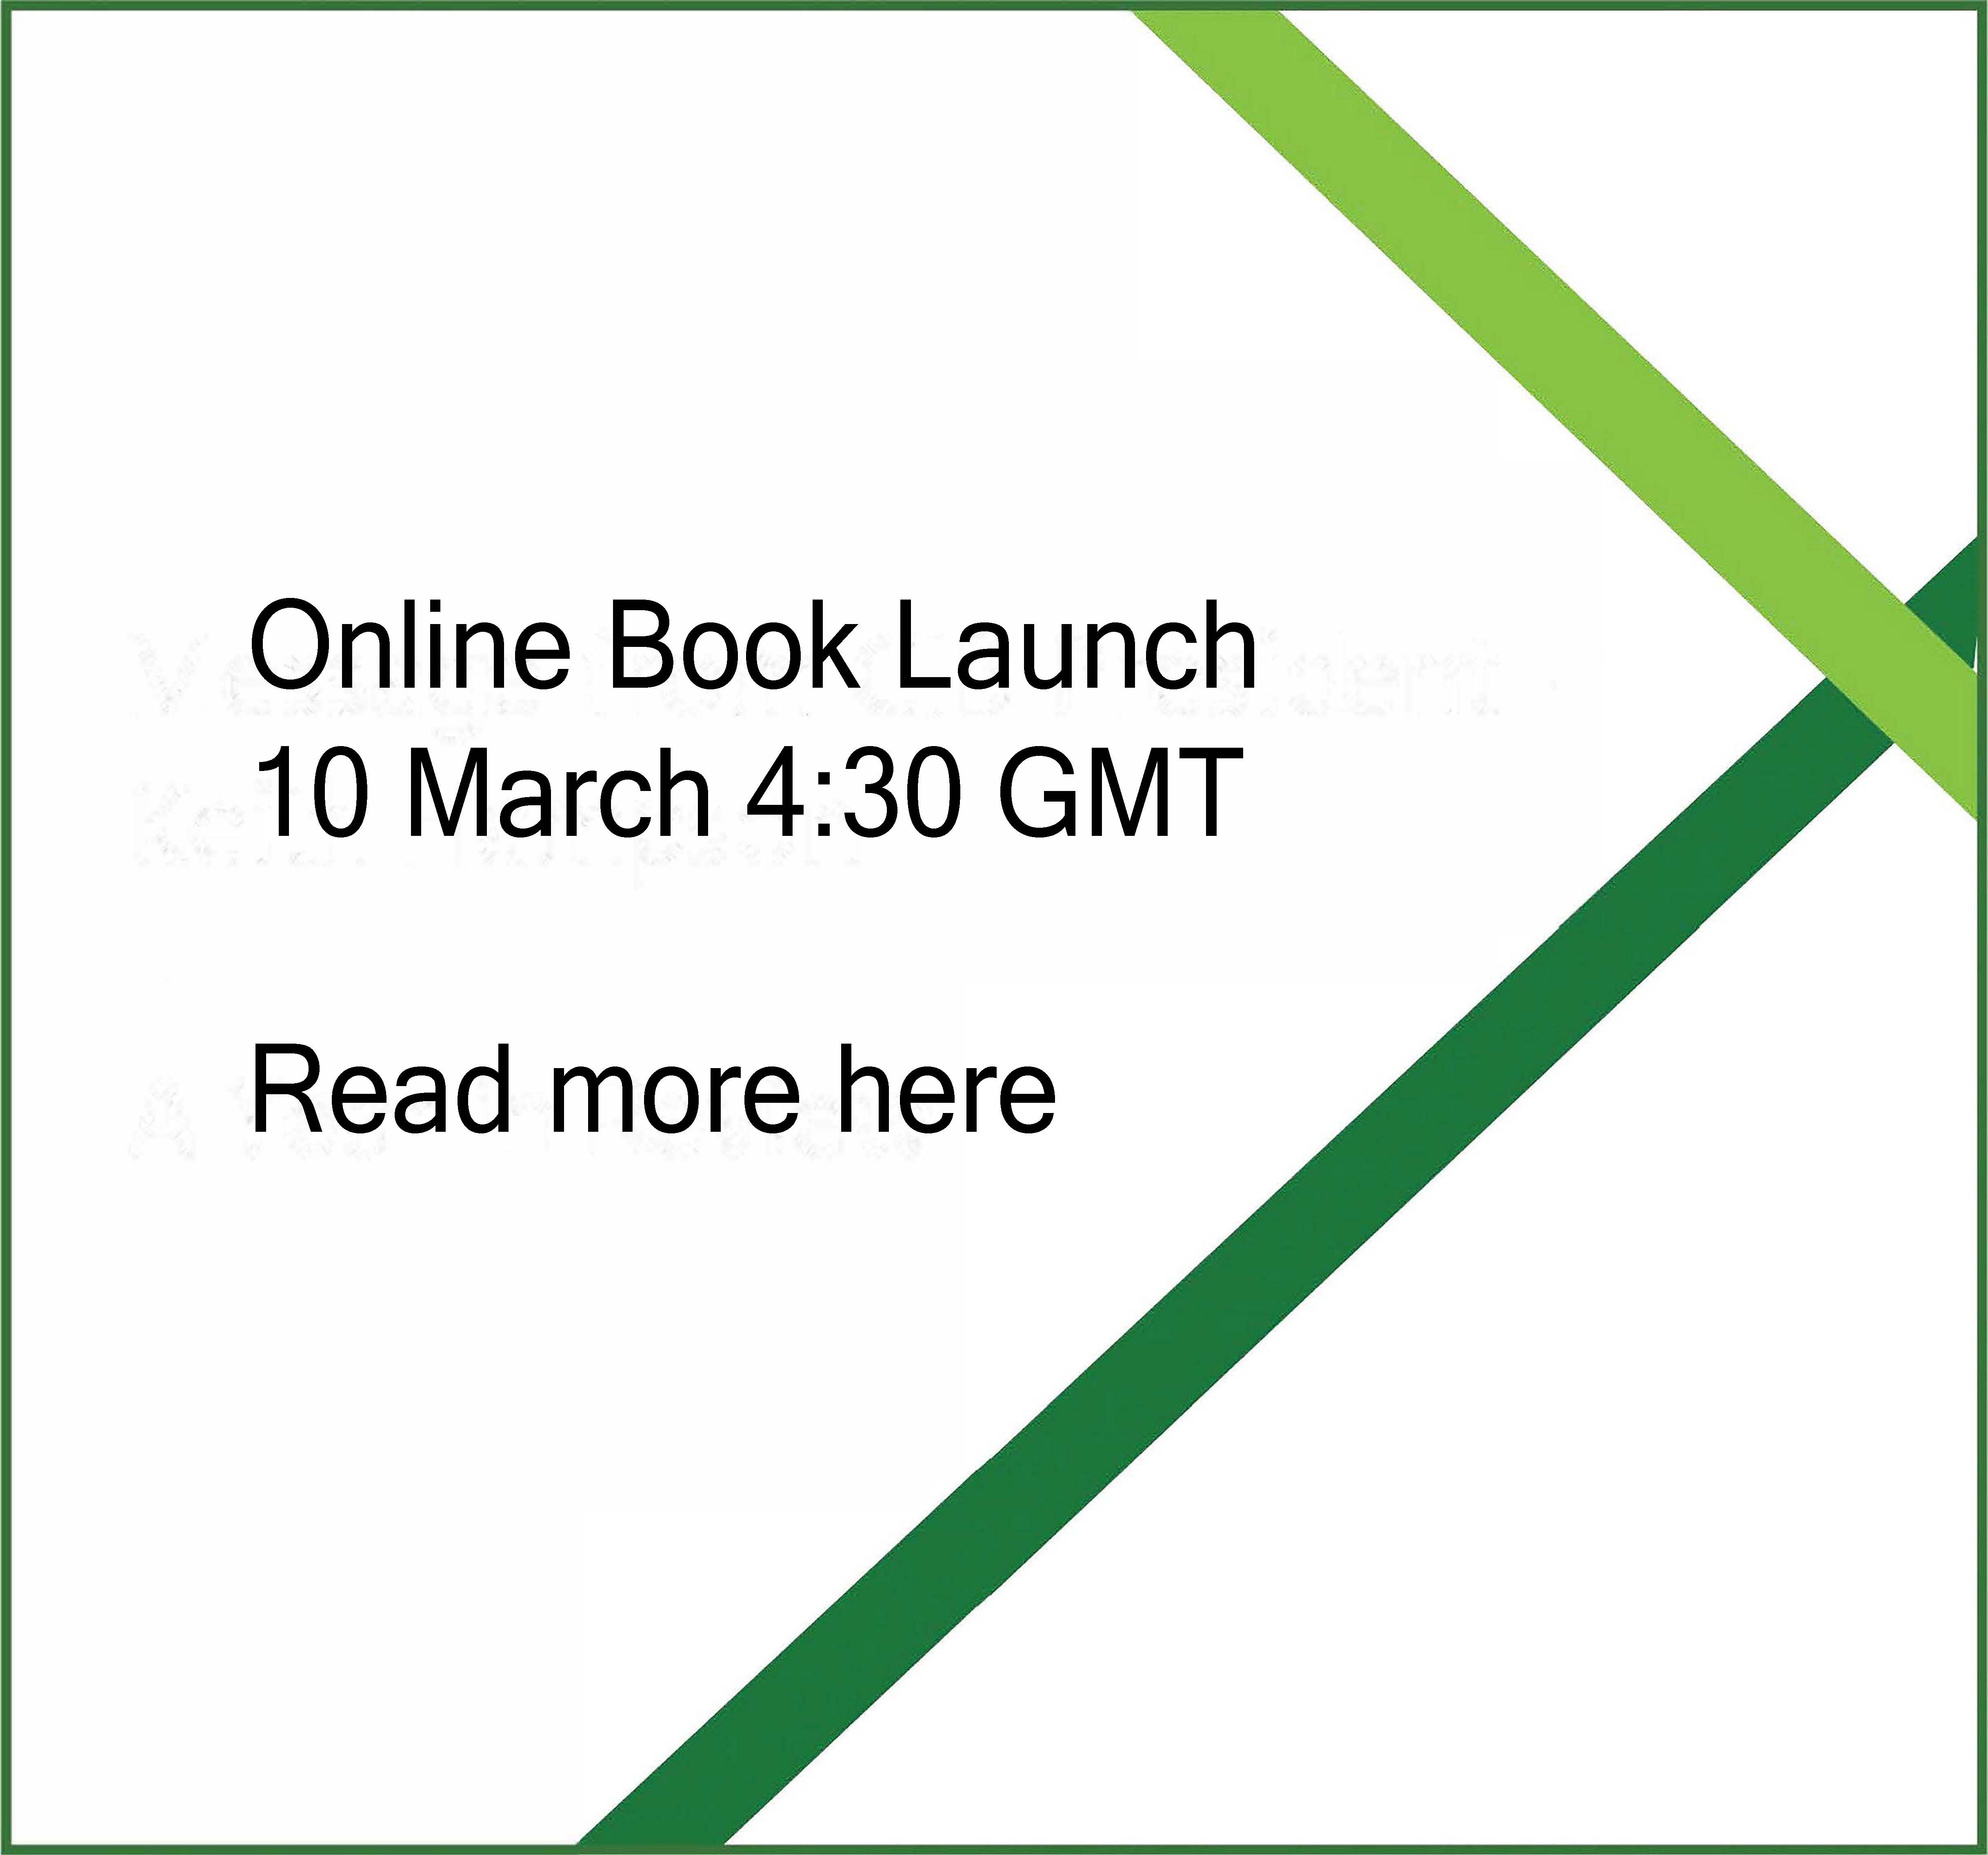 Online Book Launch 10 March 4:30 GMT